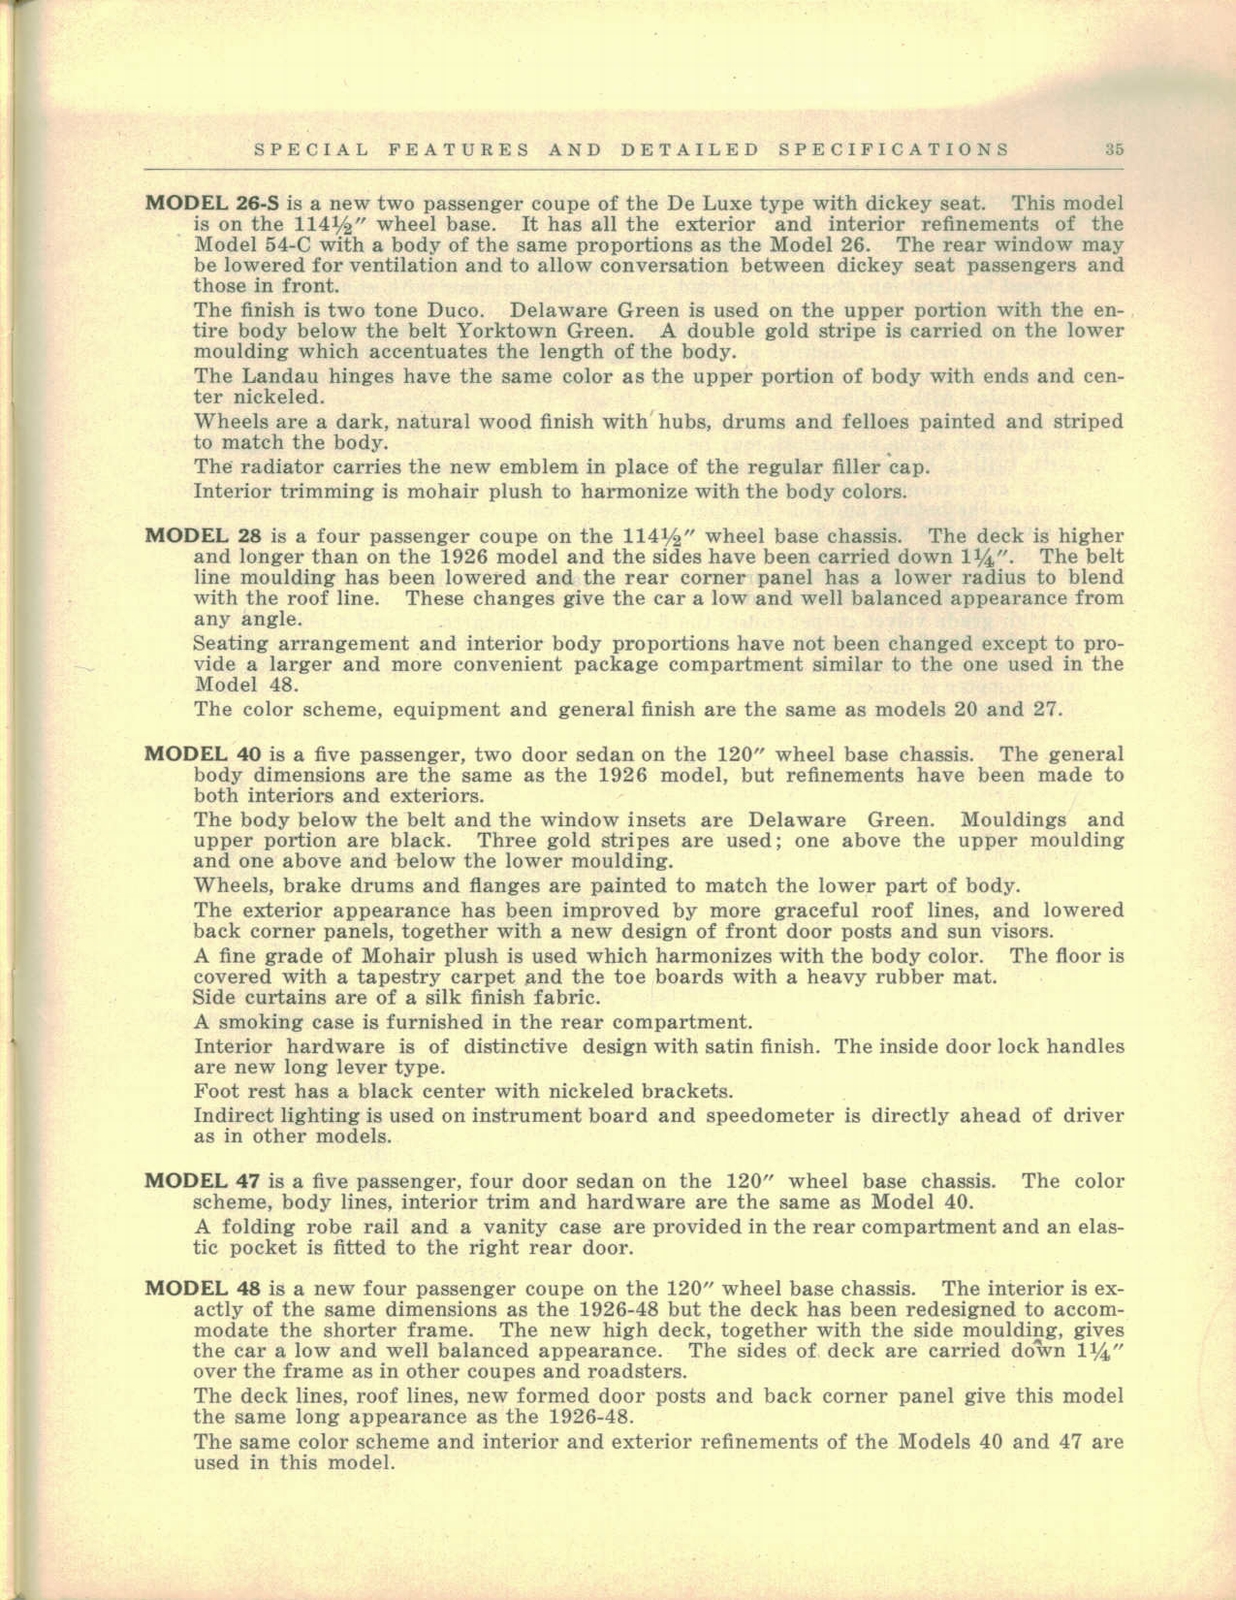 n_1927 Buick Special Features and Specs-35.jpg